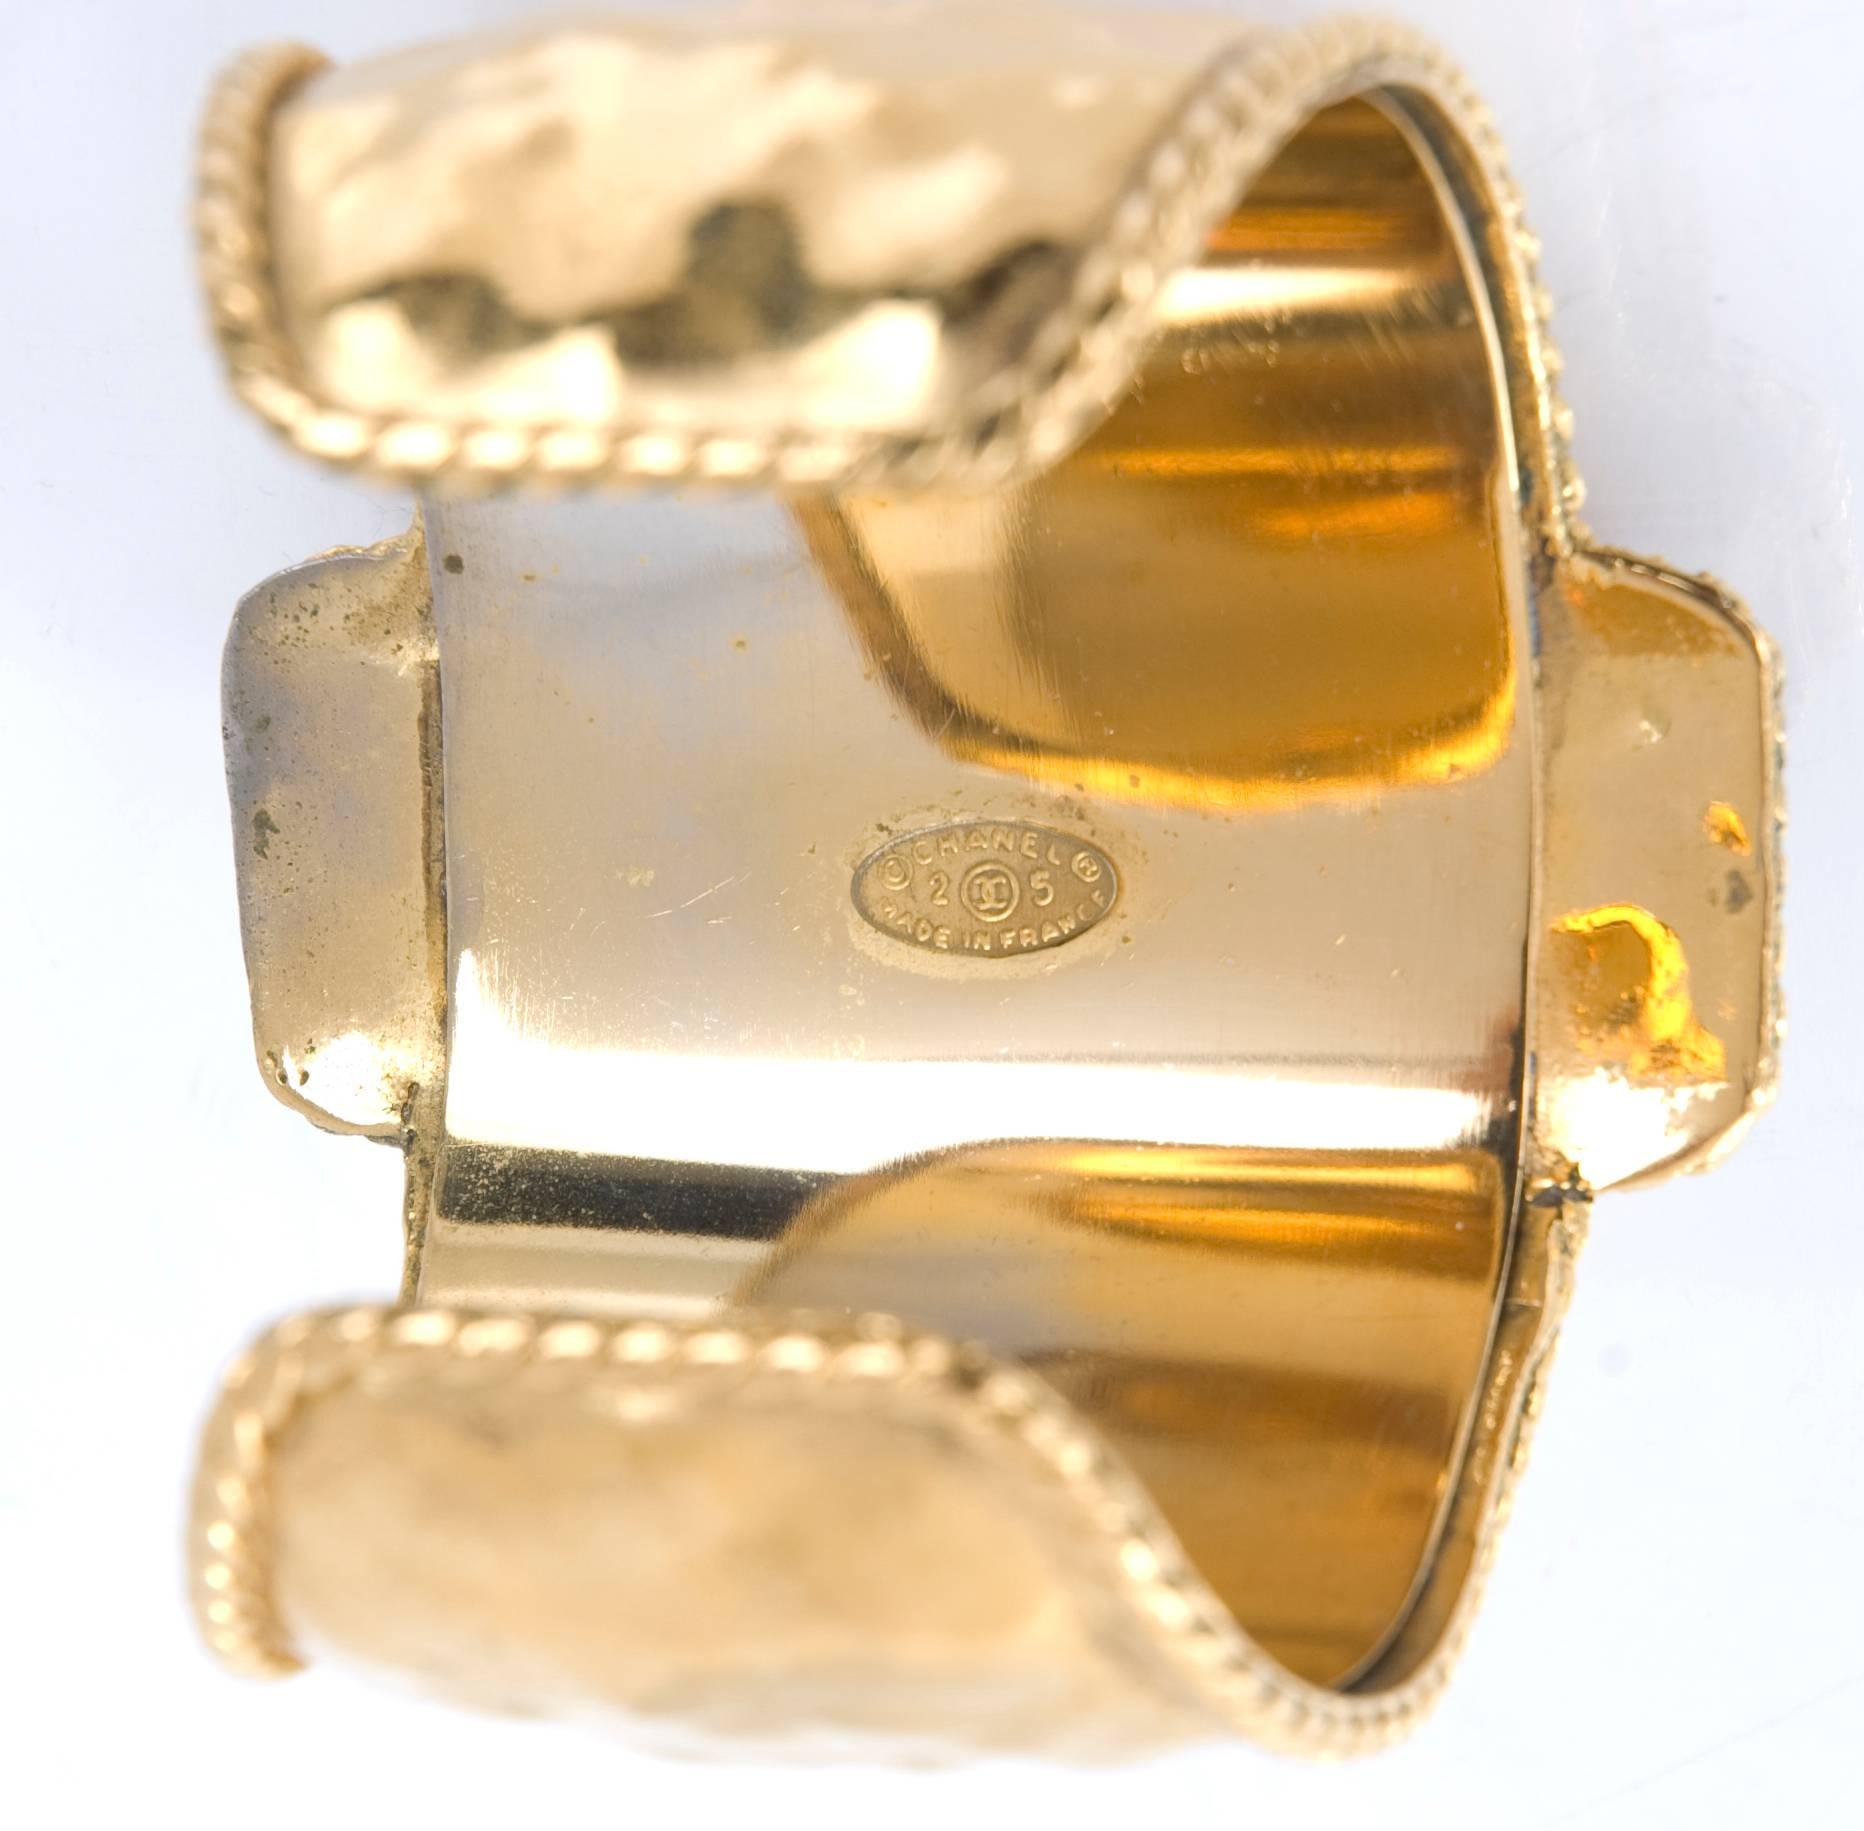 2005 Chanel Gripoix Bracelet Cuff Gilded Metal, Pearl Beads & Large Stones For Sale 1